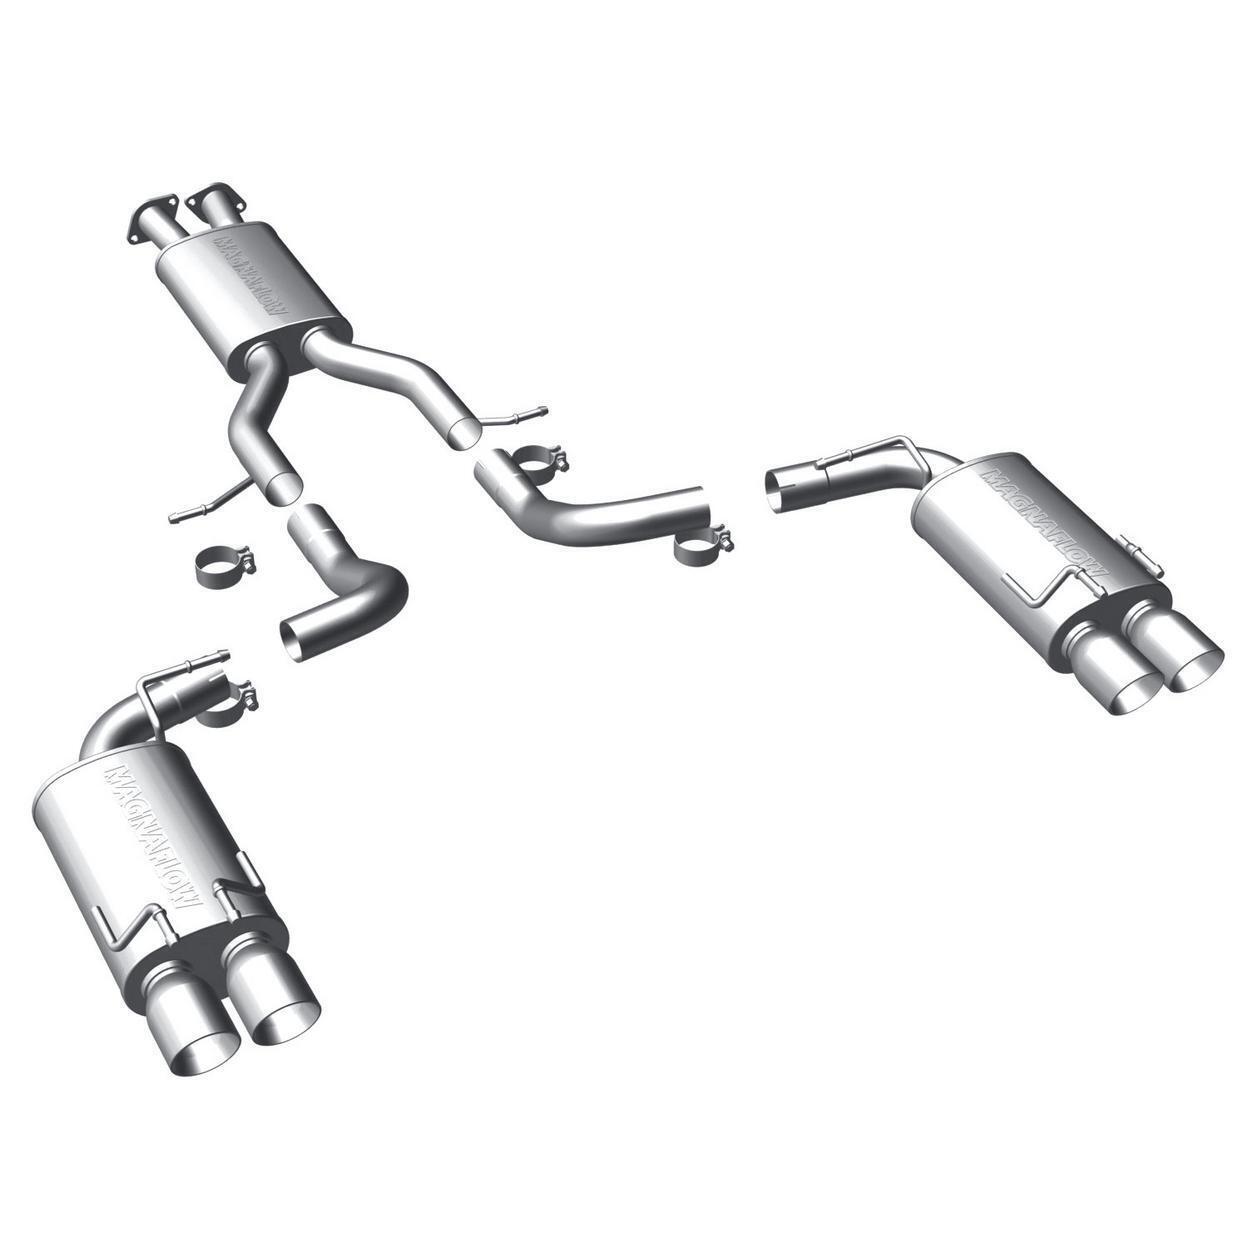 Exhaust System Kit for 1991-1994 Nissan 300ZX